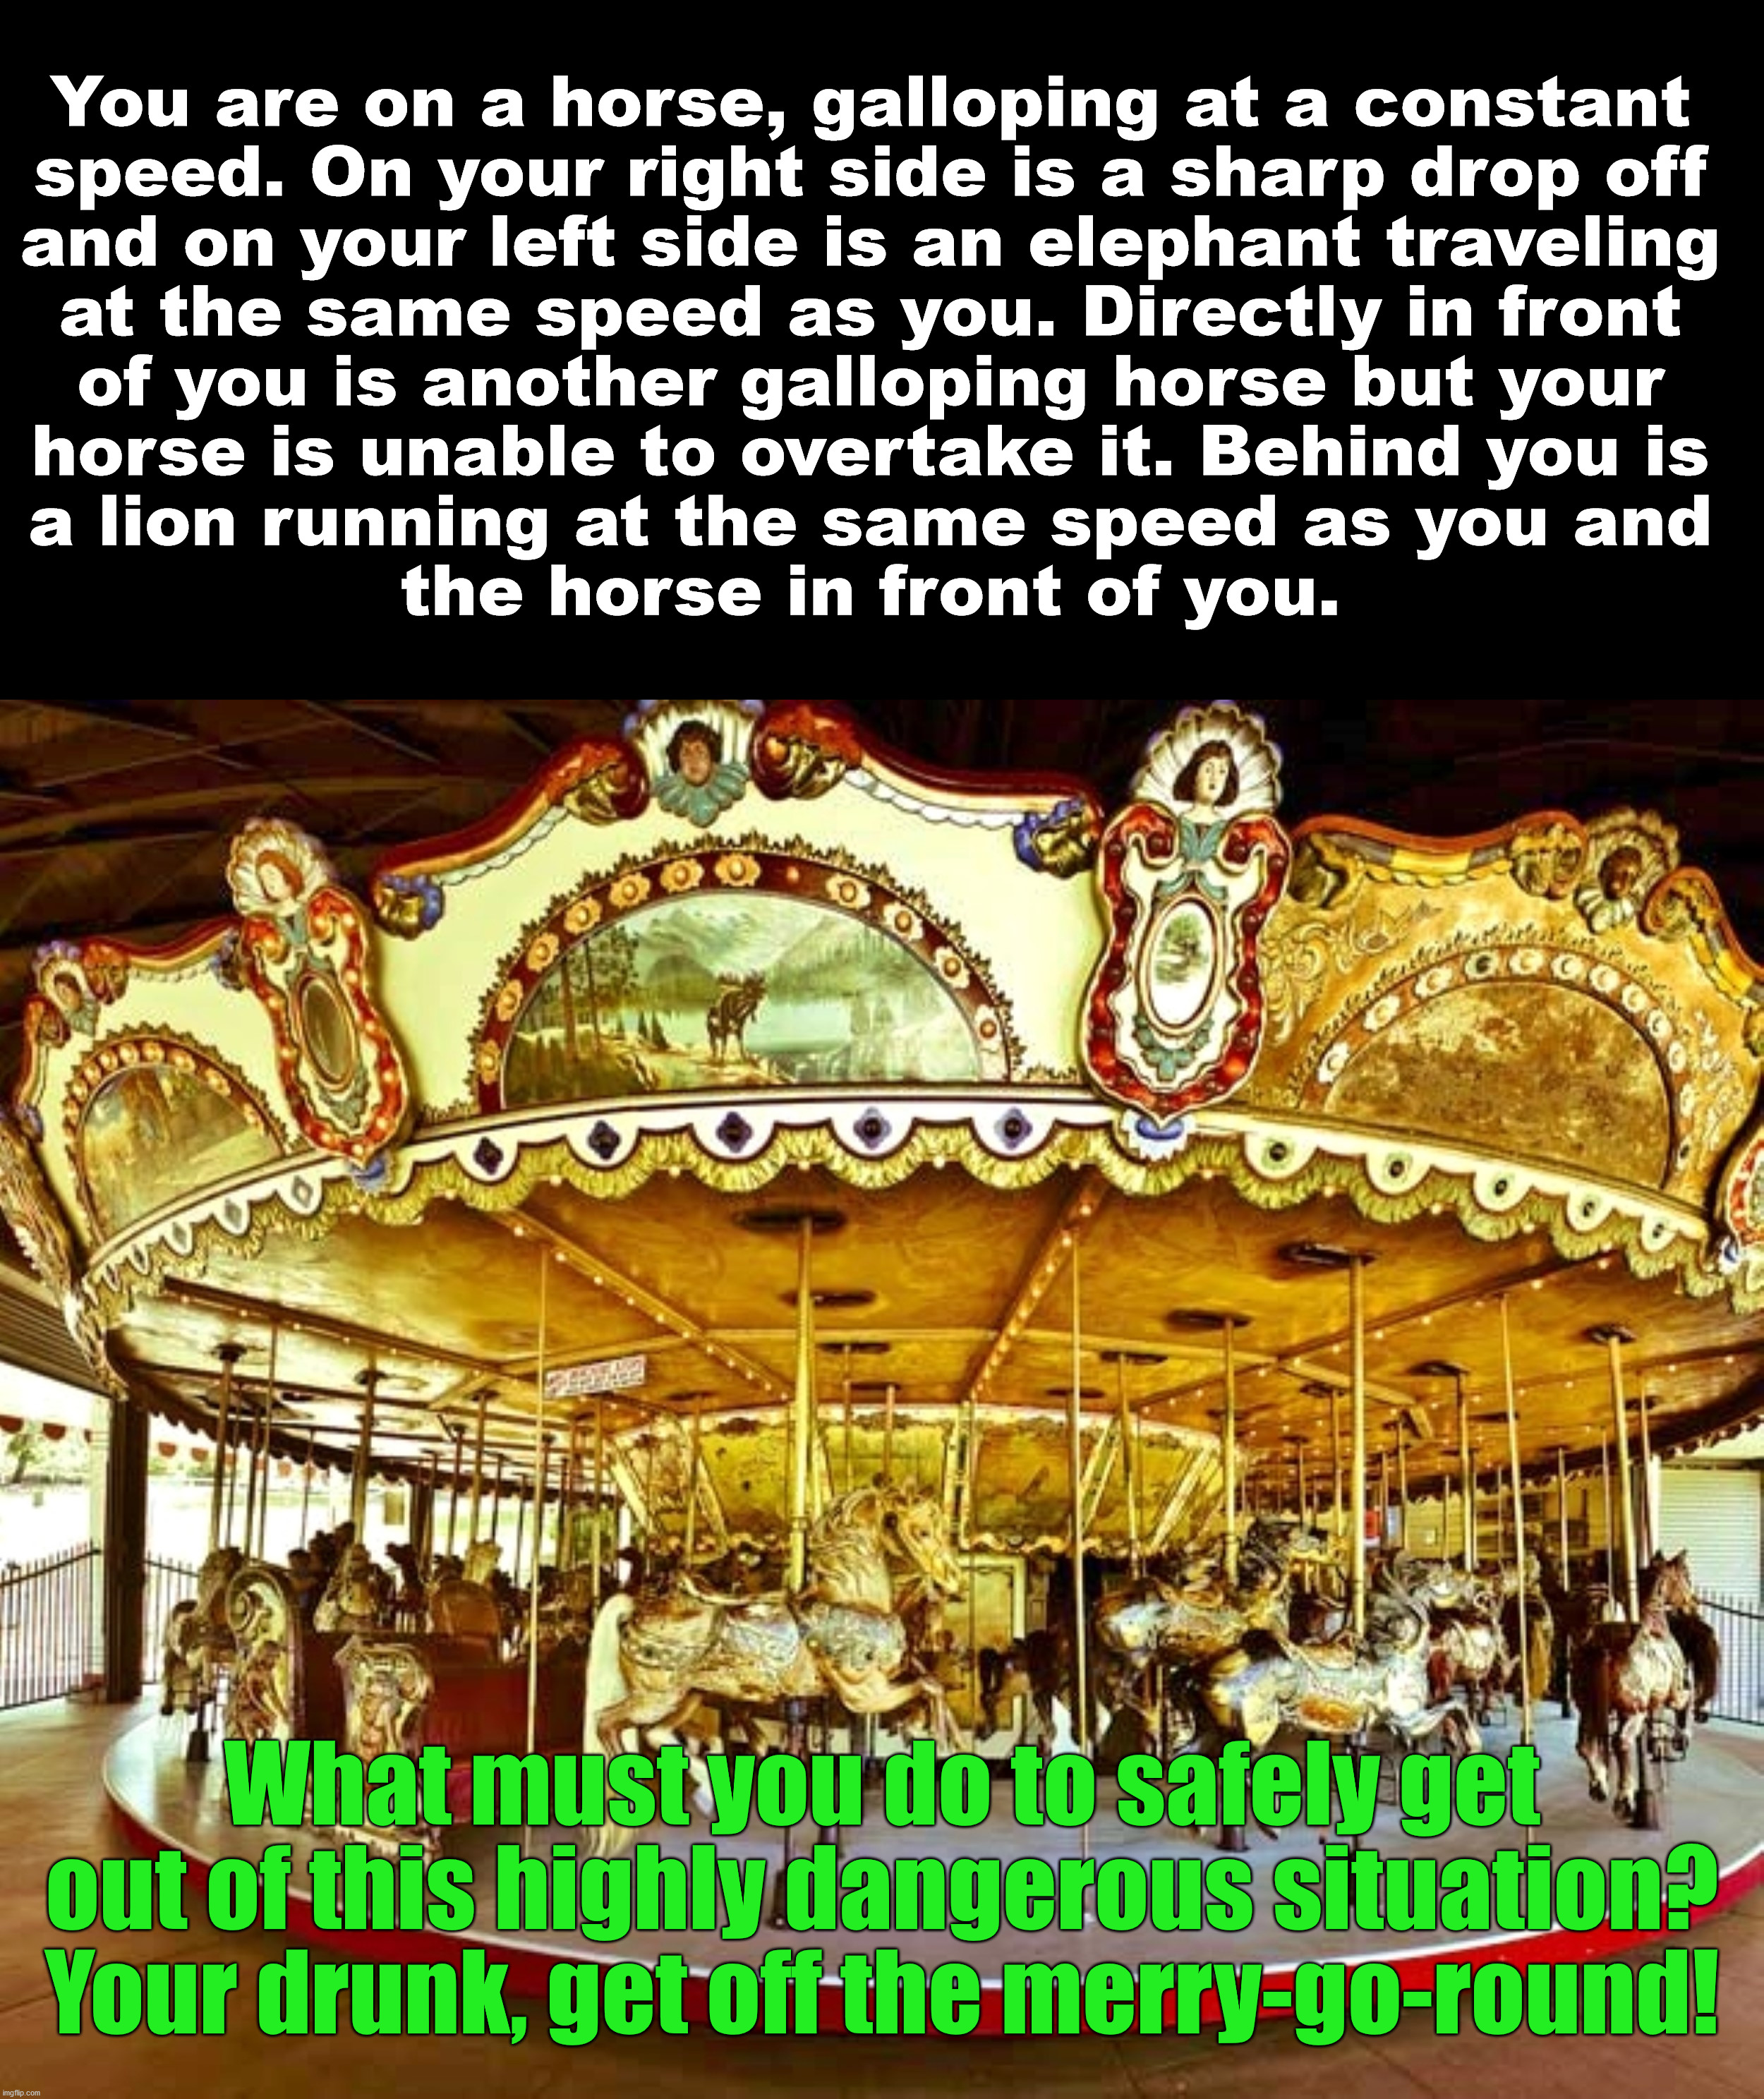 You are on a horse, galloping at a constant 
speed. On your right side is a sharp drop off 
and on your left side is an elephant traveling 
at the same speed as you. Directly in front 
of you is another galloping horse but your 
horse is unable to overtake it. Behind you is 
a lion running at the same speed as you and 
the horse in front of you. What must you do to safely get out of this highly dangerous situation? Your drunk, get off the merry-go-round! | made w/ Imgflip meme maker